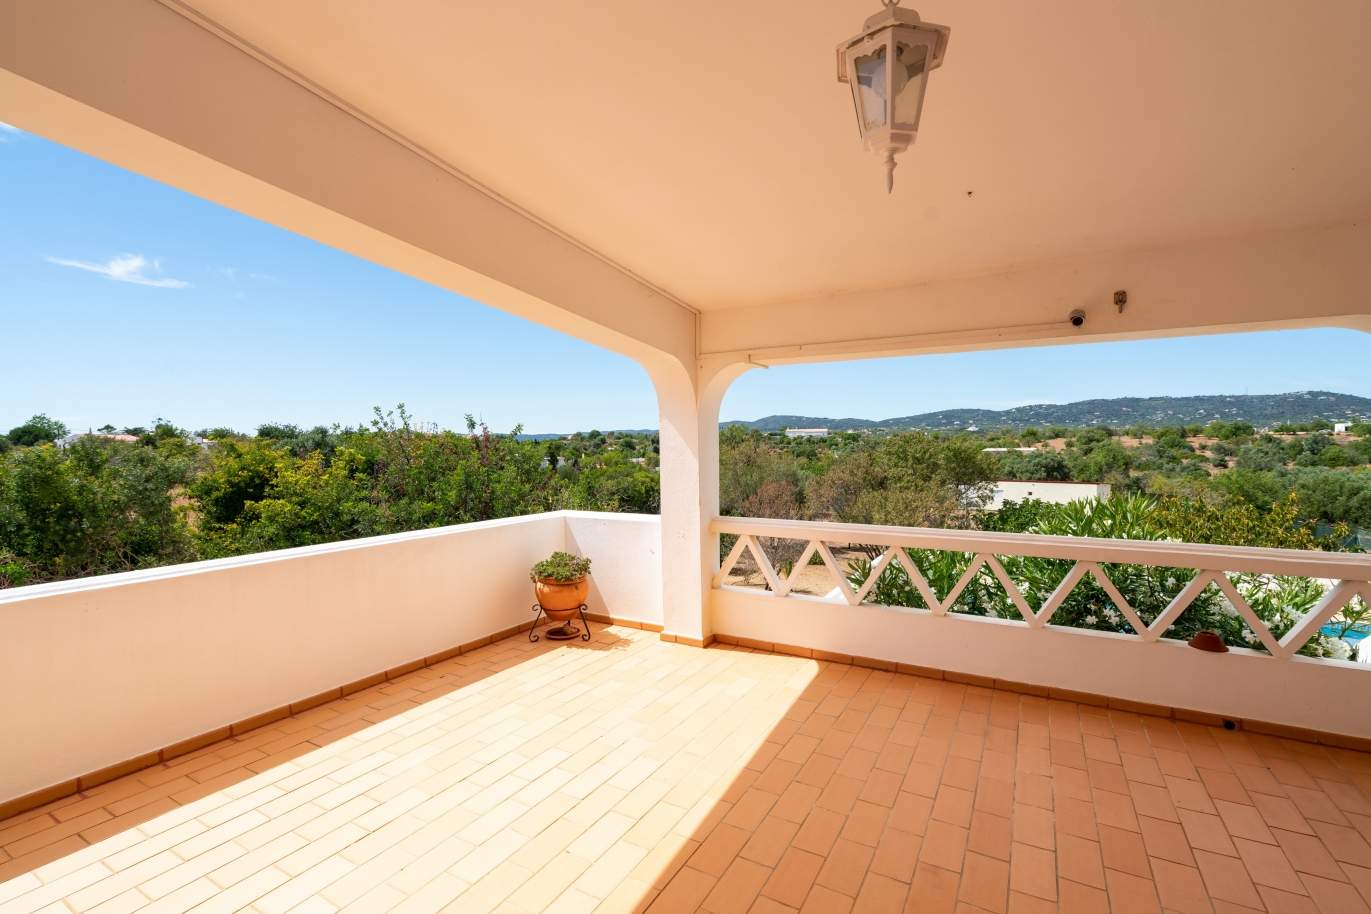 4 Bedroom Villa with Swimming Pool, for sale, Quelfes, Olhão, Algarve_144151